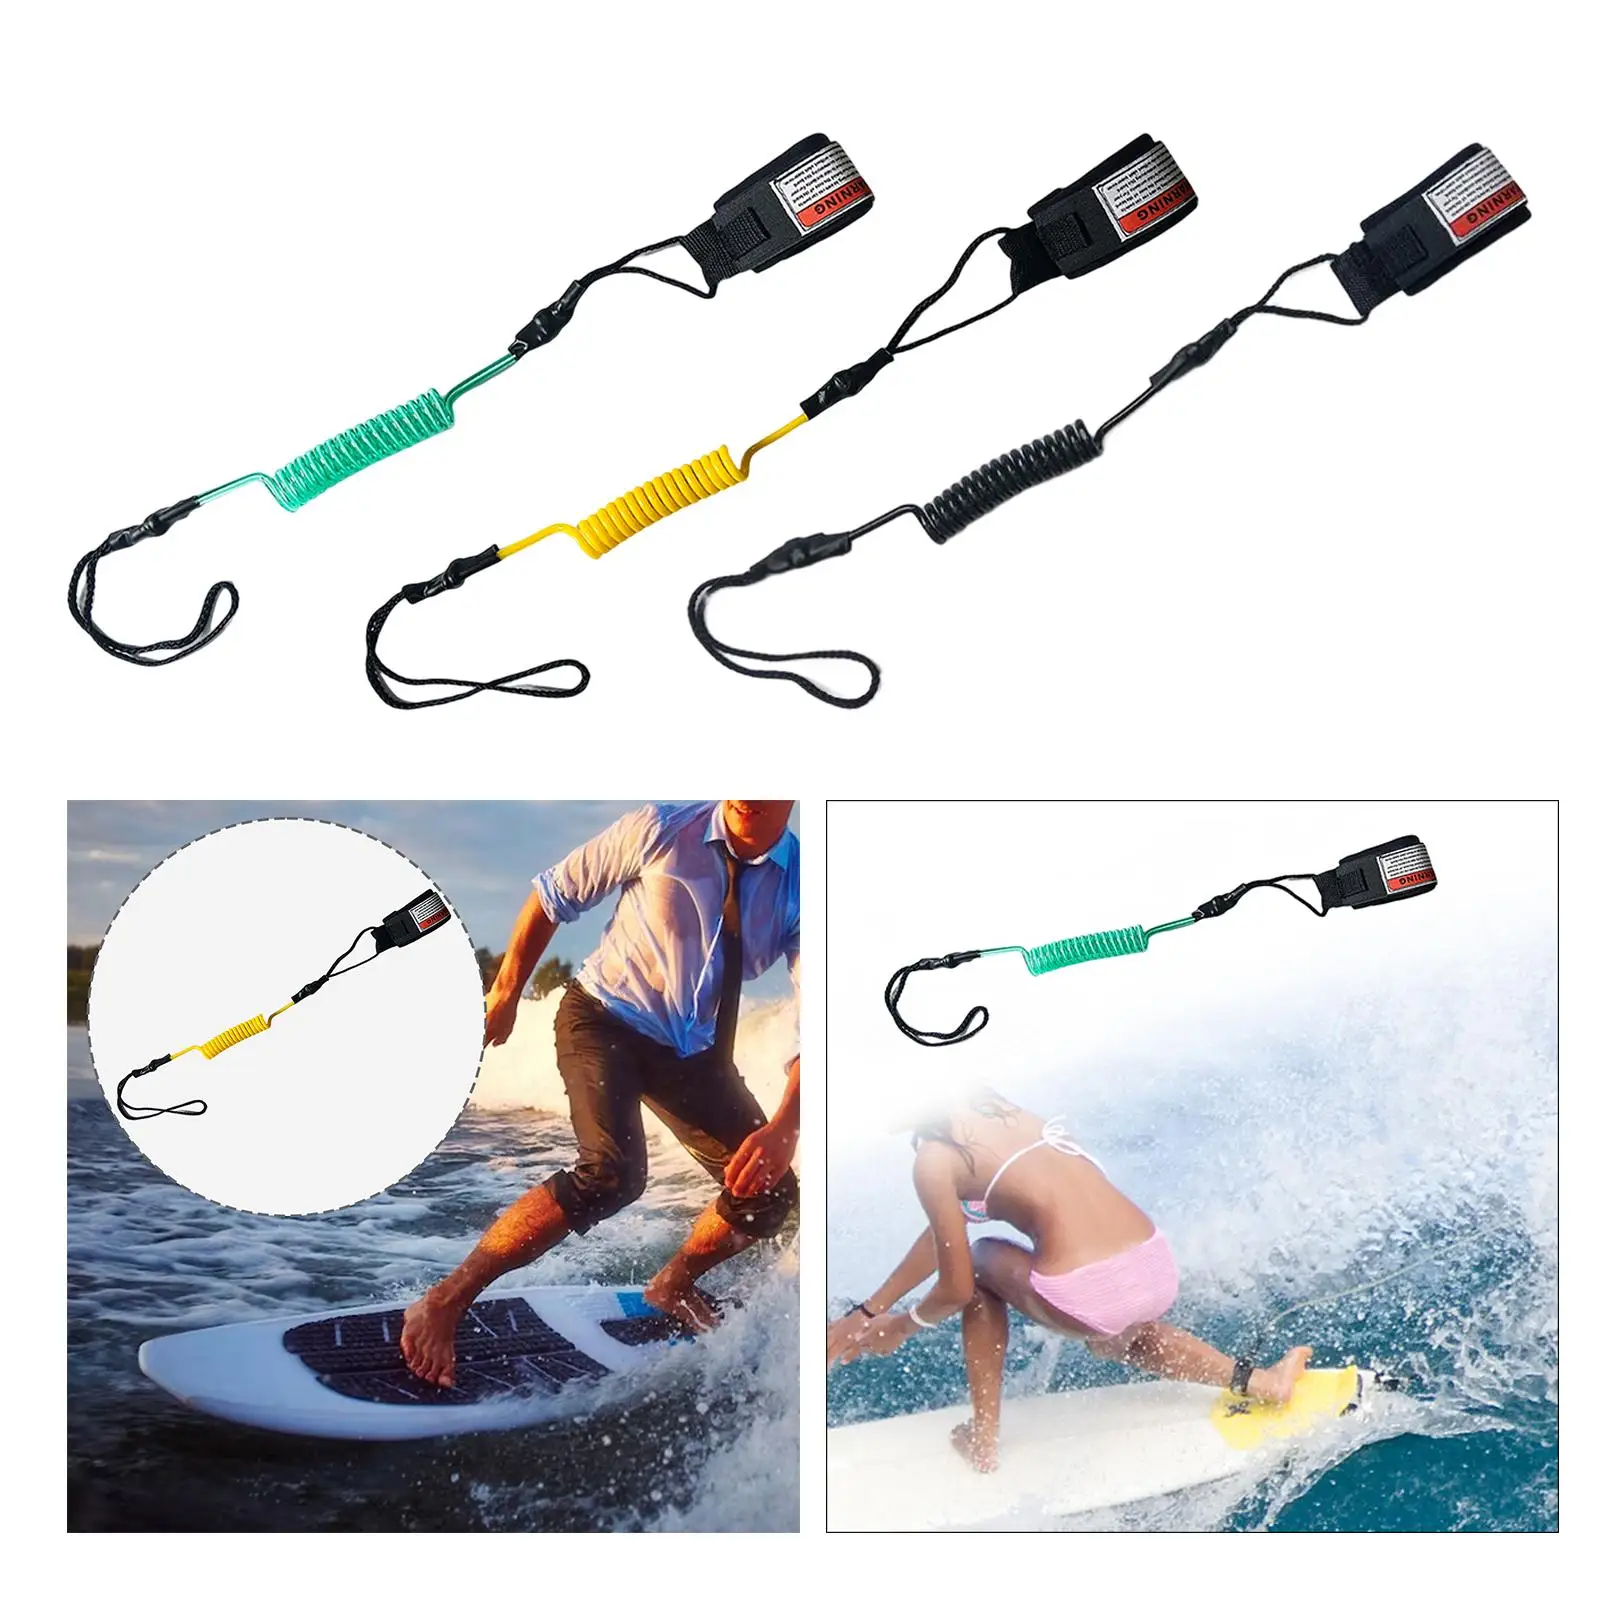 Surfboard Leash, Surfing Paddle Board Rope, Surf Leash, Paddleboard Cord Water Sports Gear